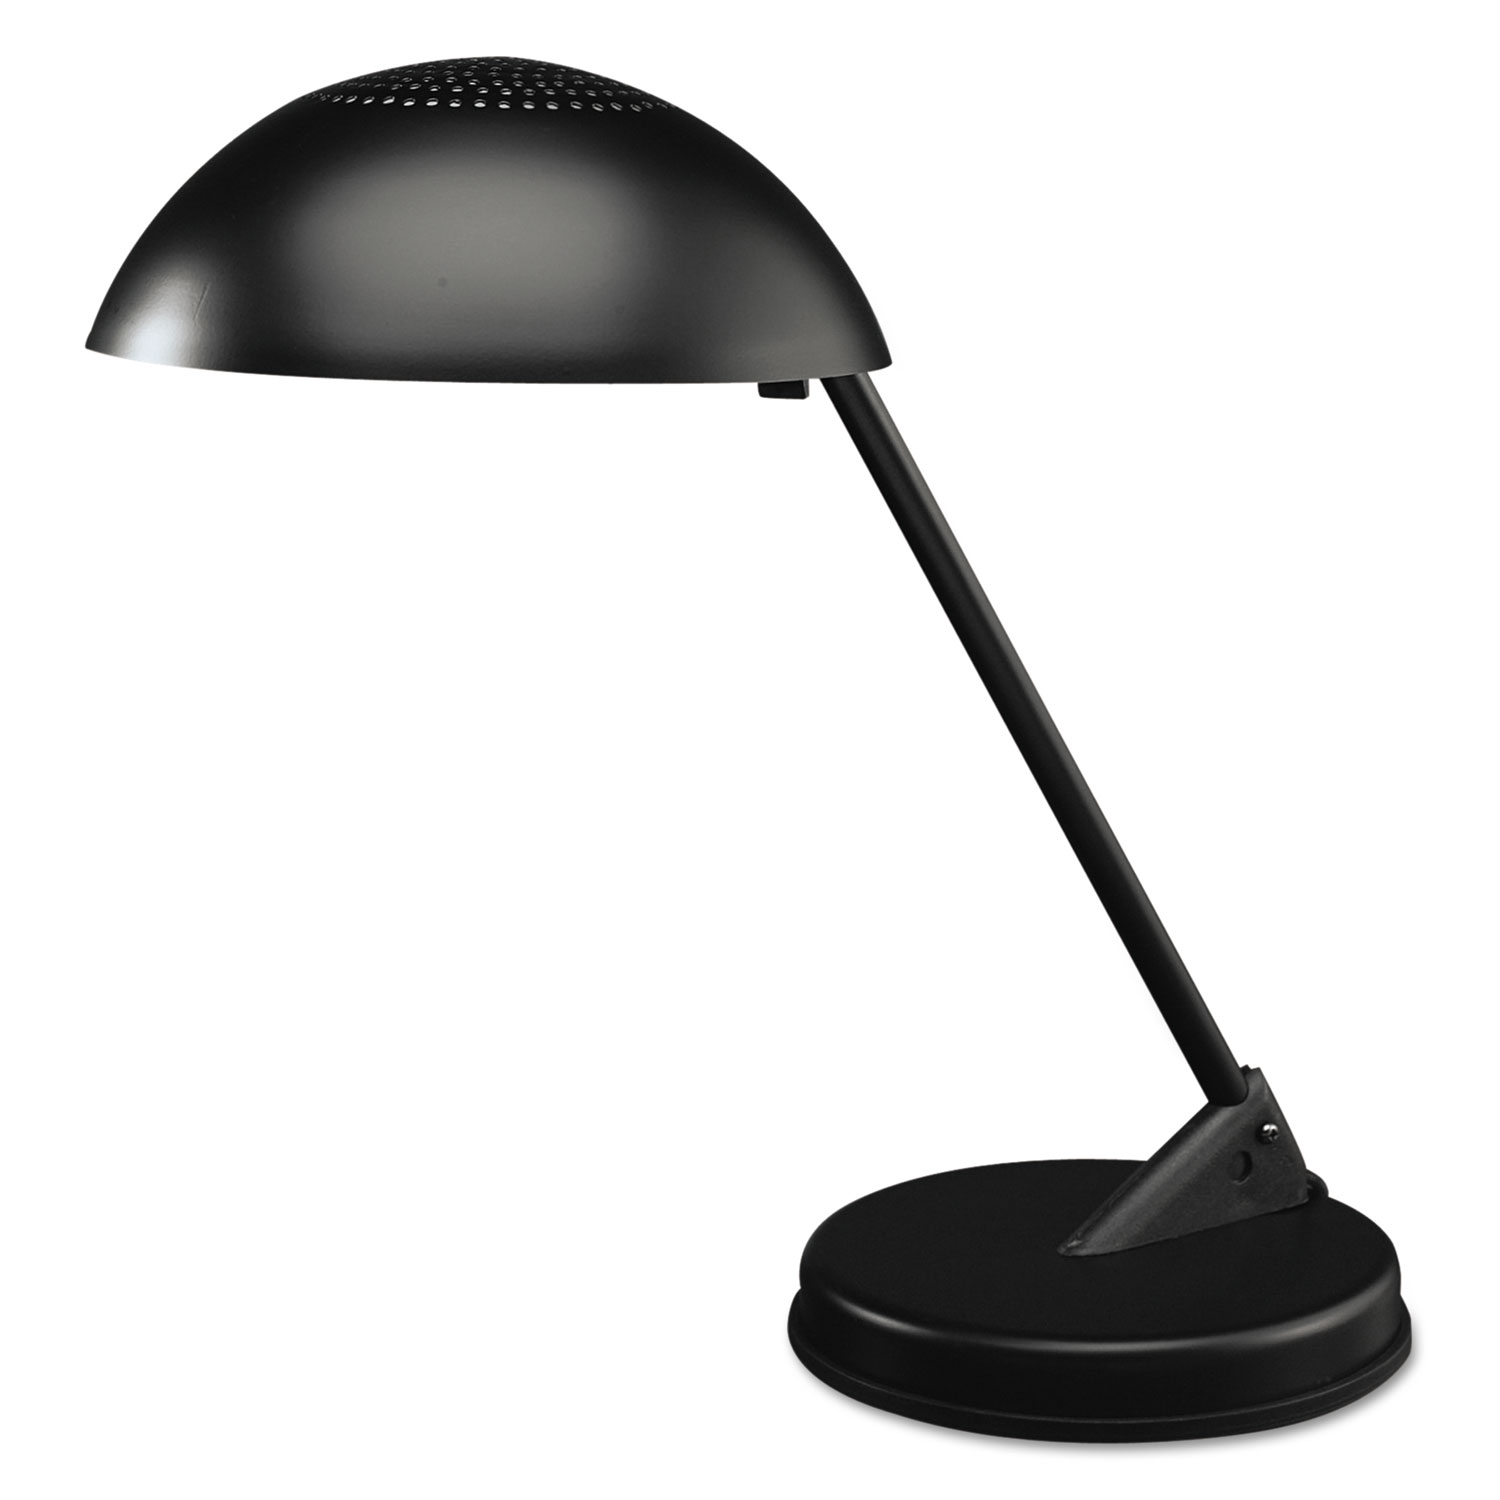 Incandescent Desk Lamp With Vented Dome Shade 8 75 W X 16 25 D X